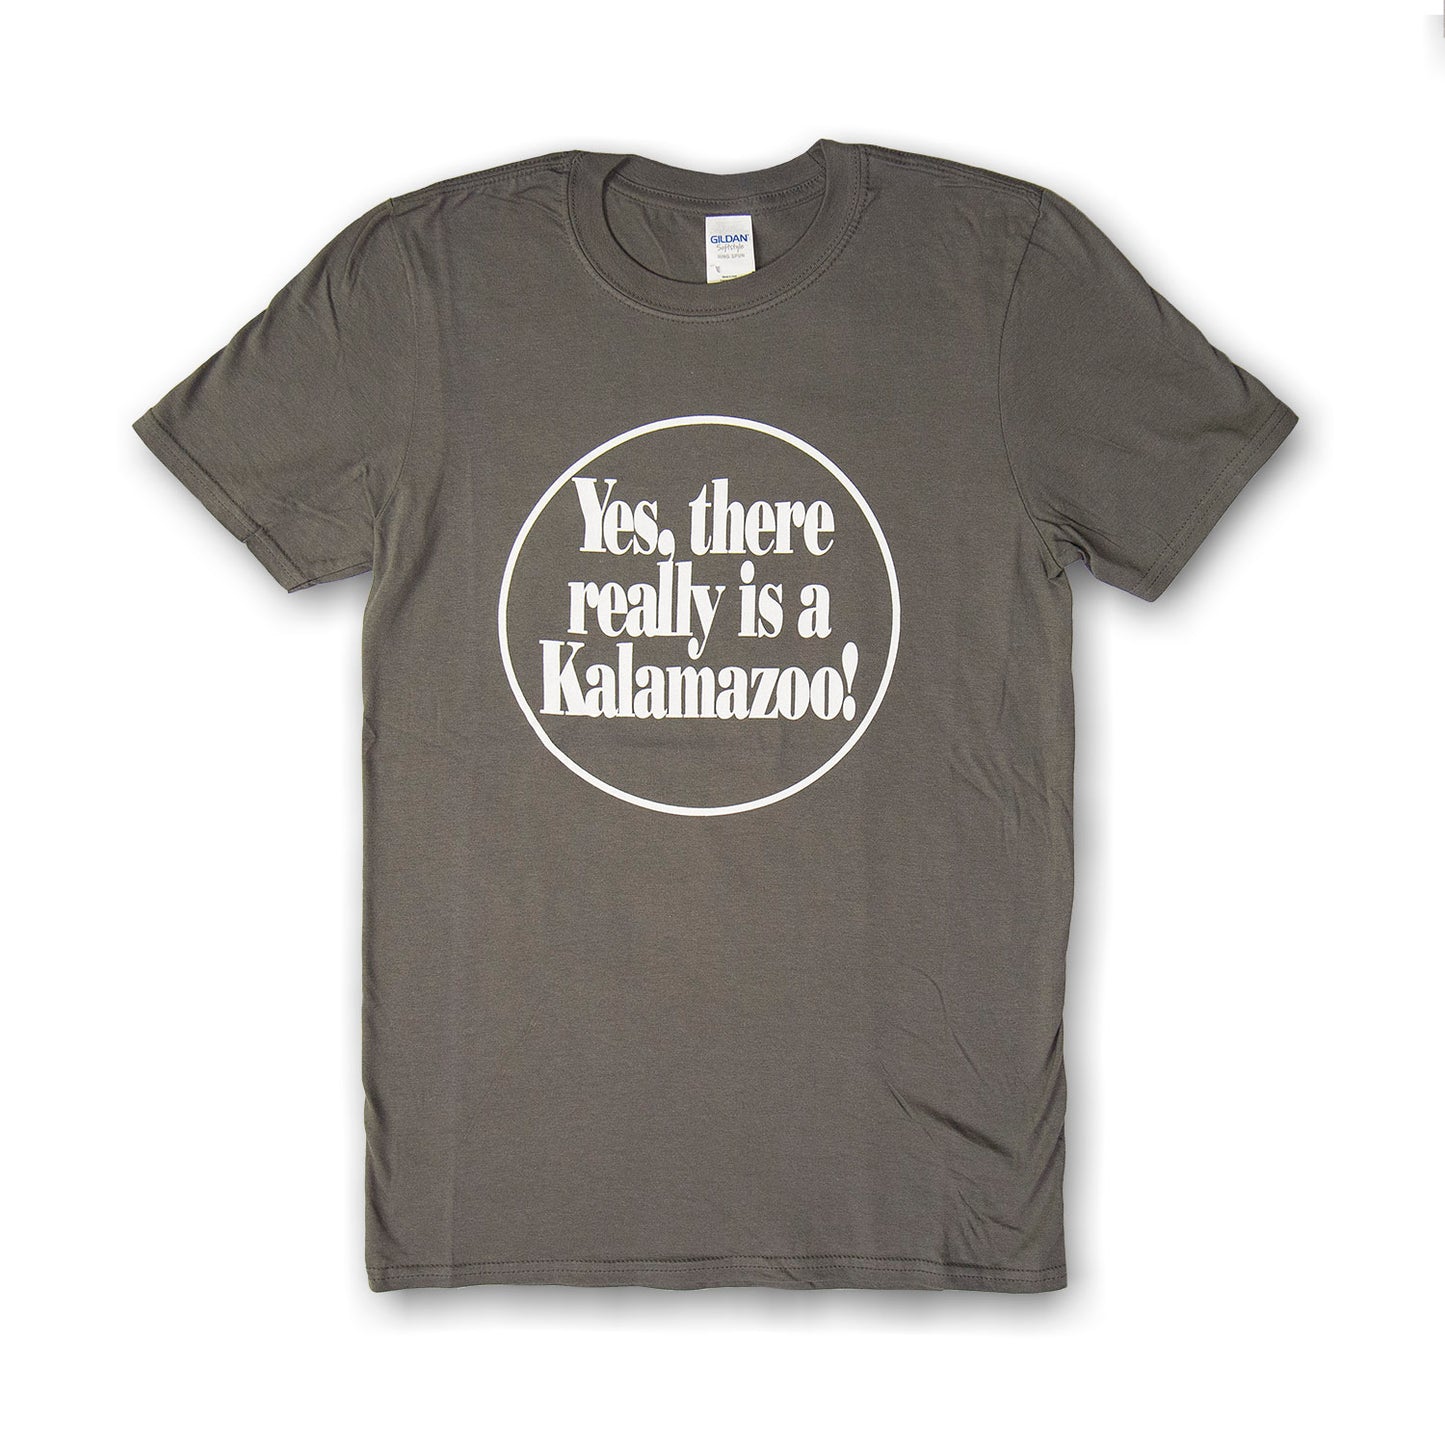 Yes there really is a Kalamazoo! Tee